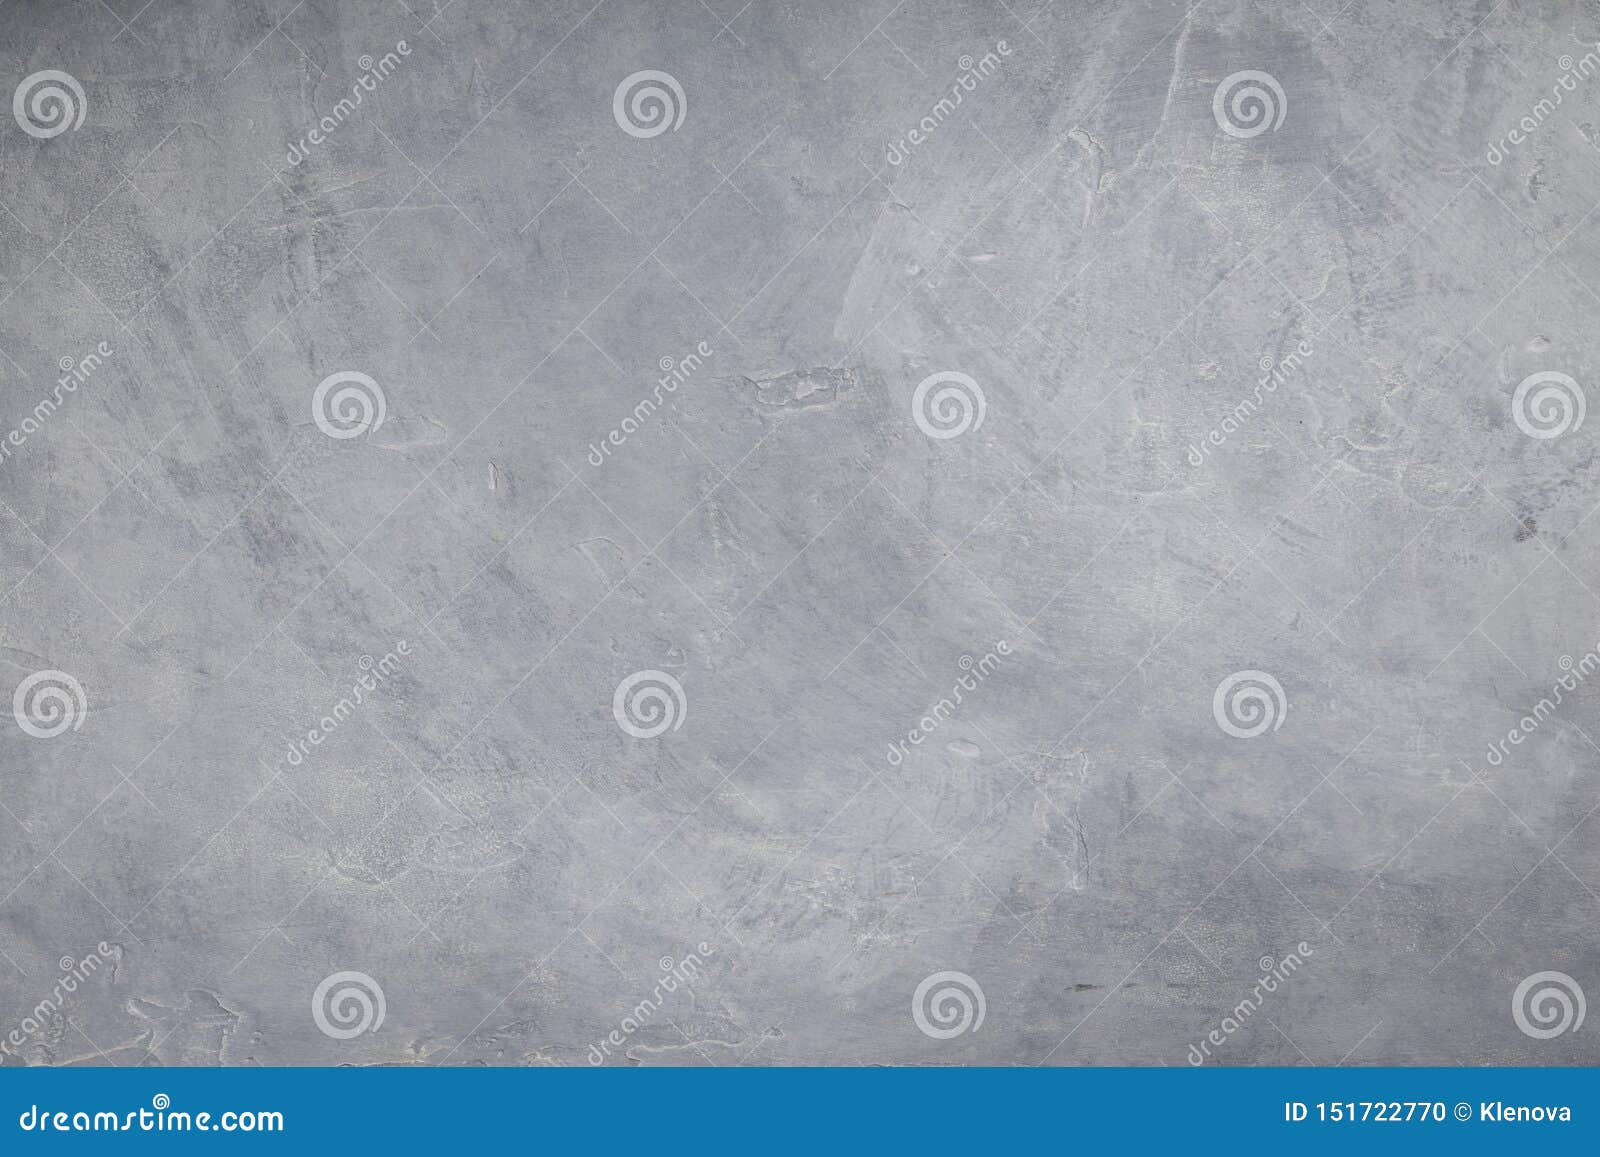 concrete wall of light grey color, cement texture background